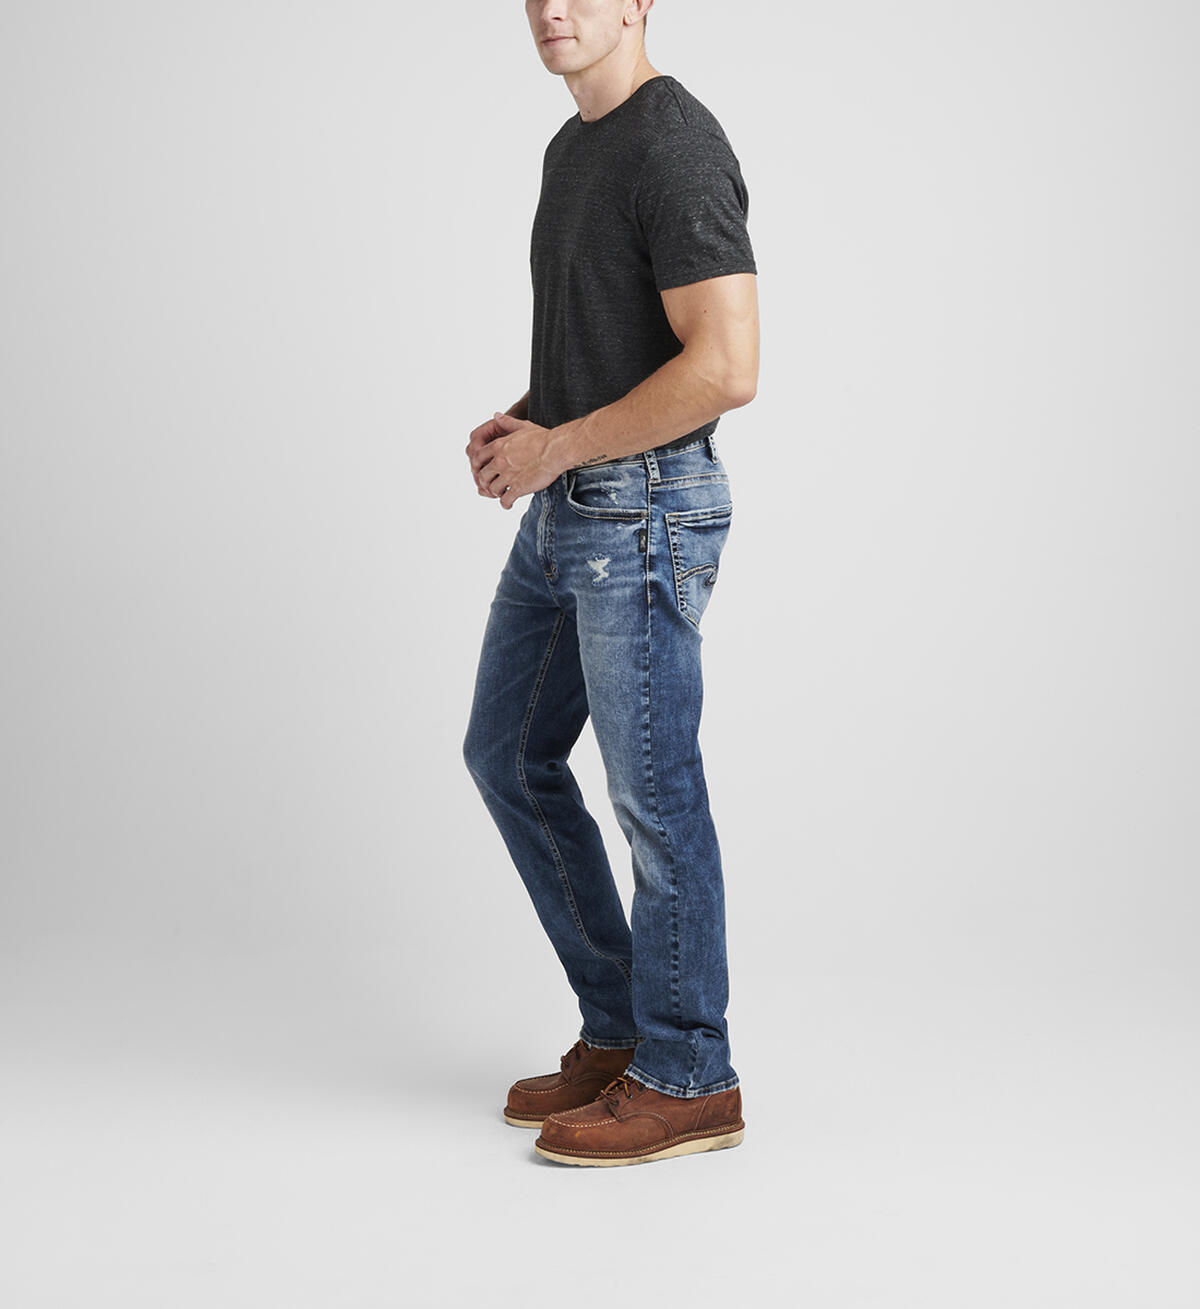 Grayson Easy Fit Straight Leg Jeans, , hi-res image number 2